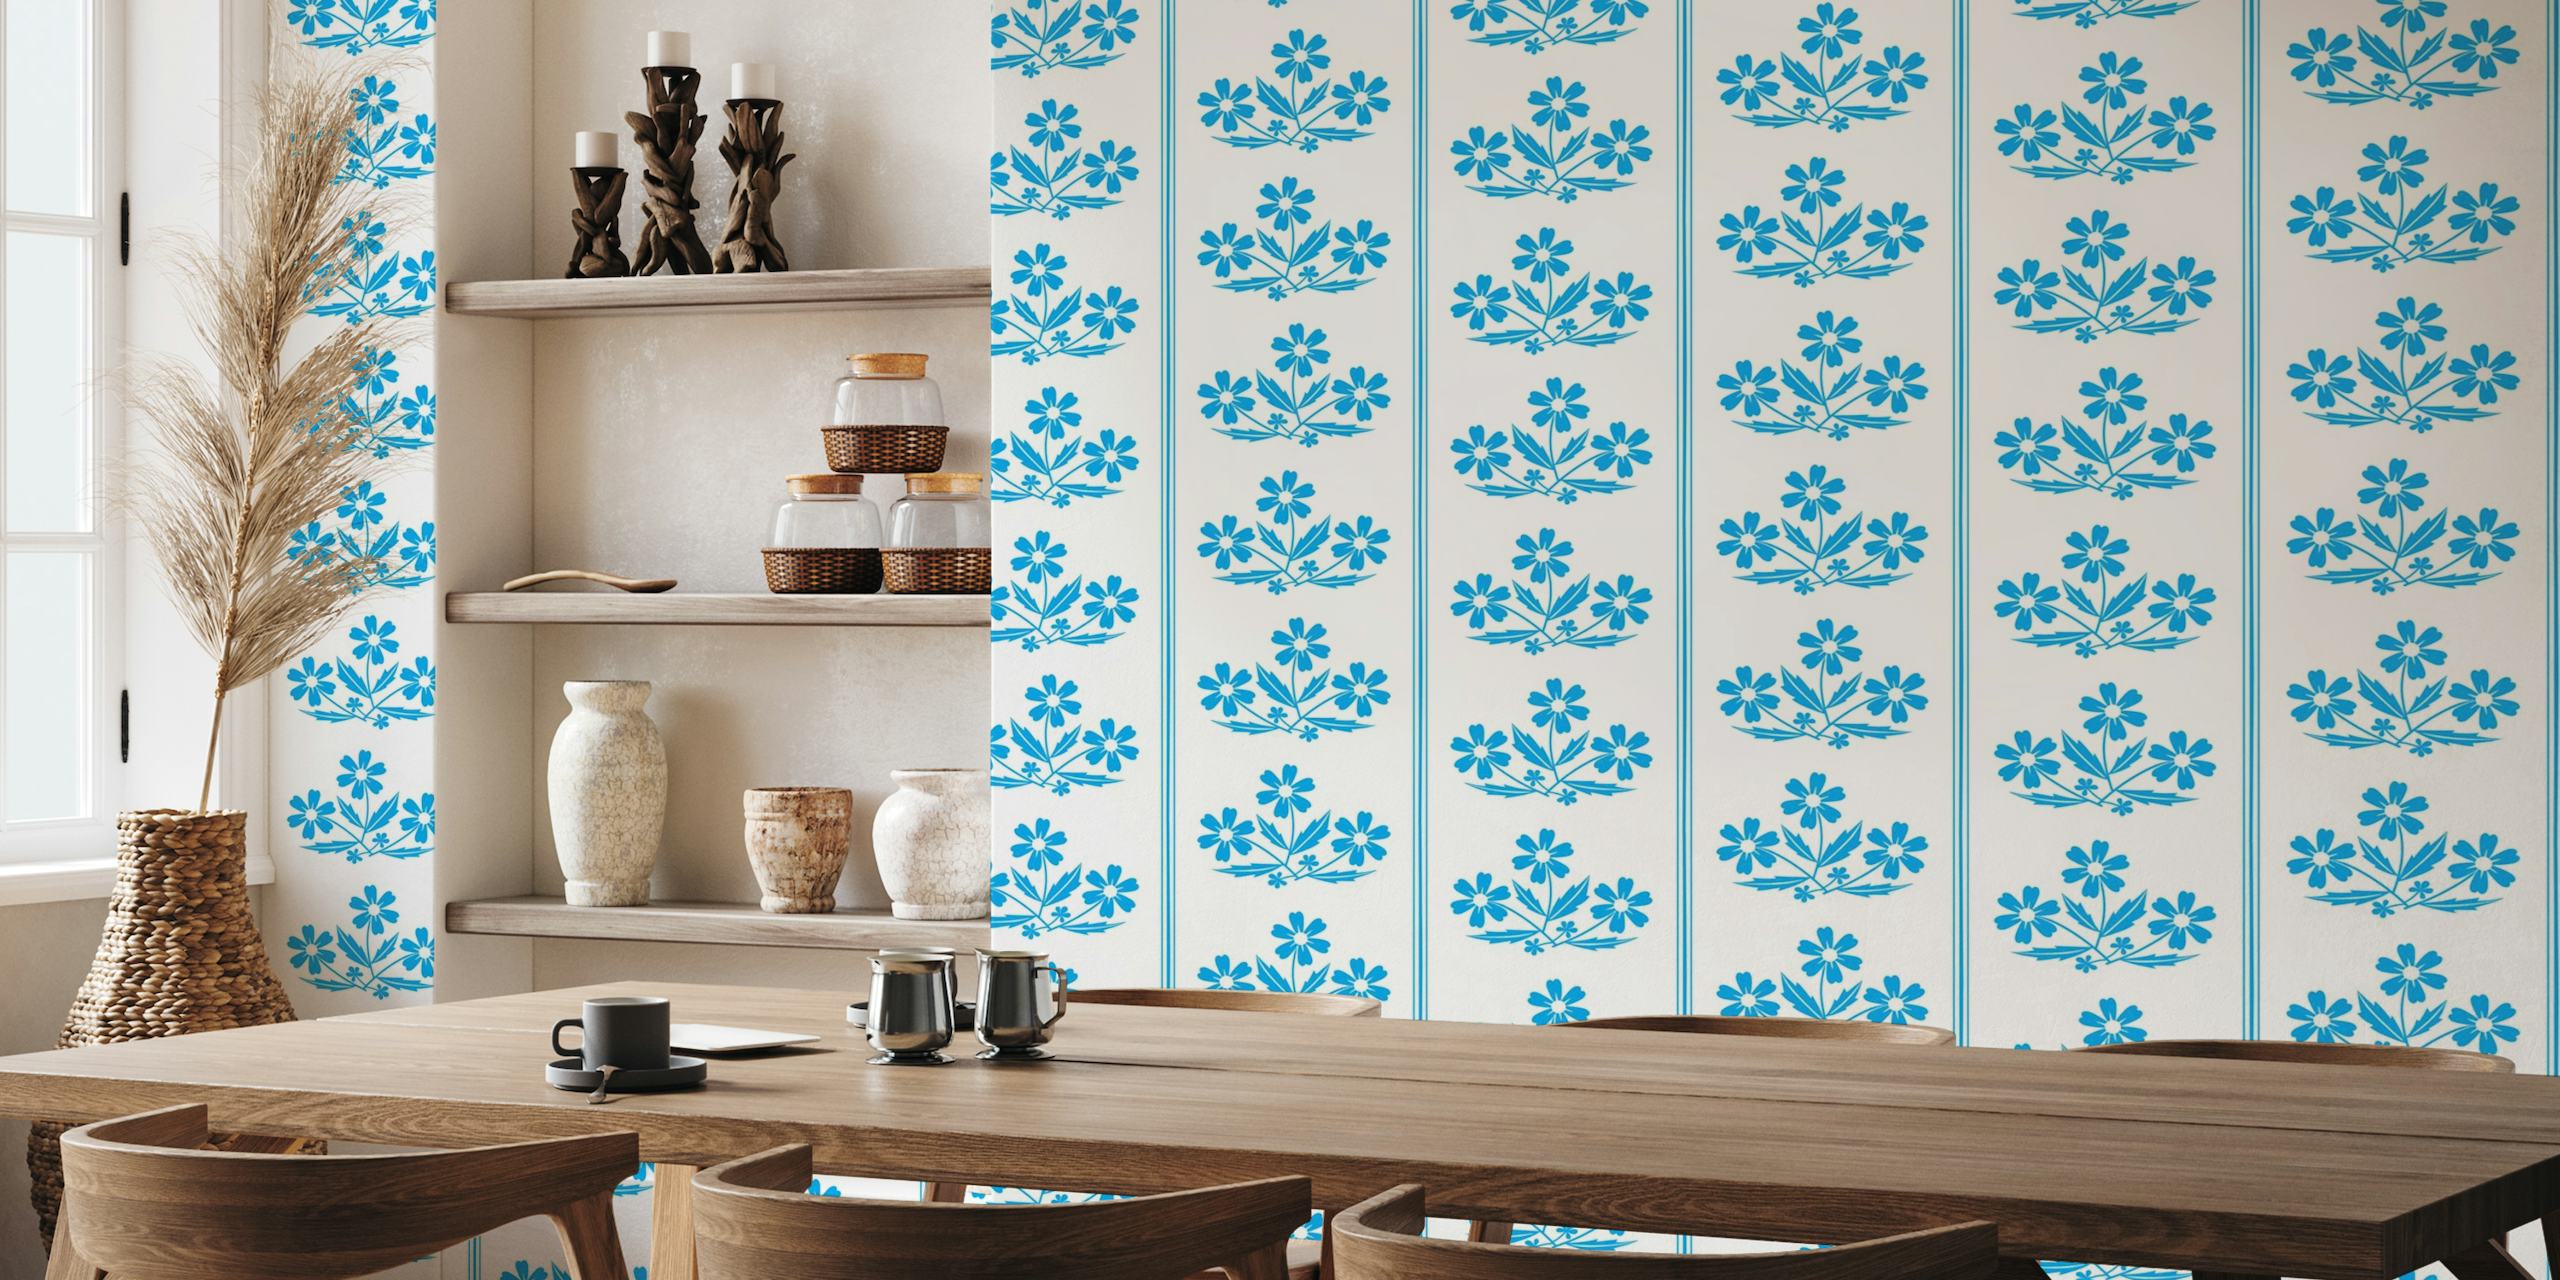 Vintage blue cornflower floral pattern with stripes on a white background wall mural.